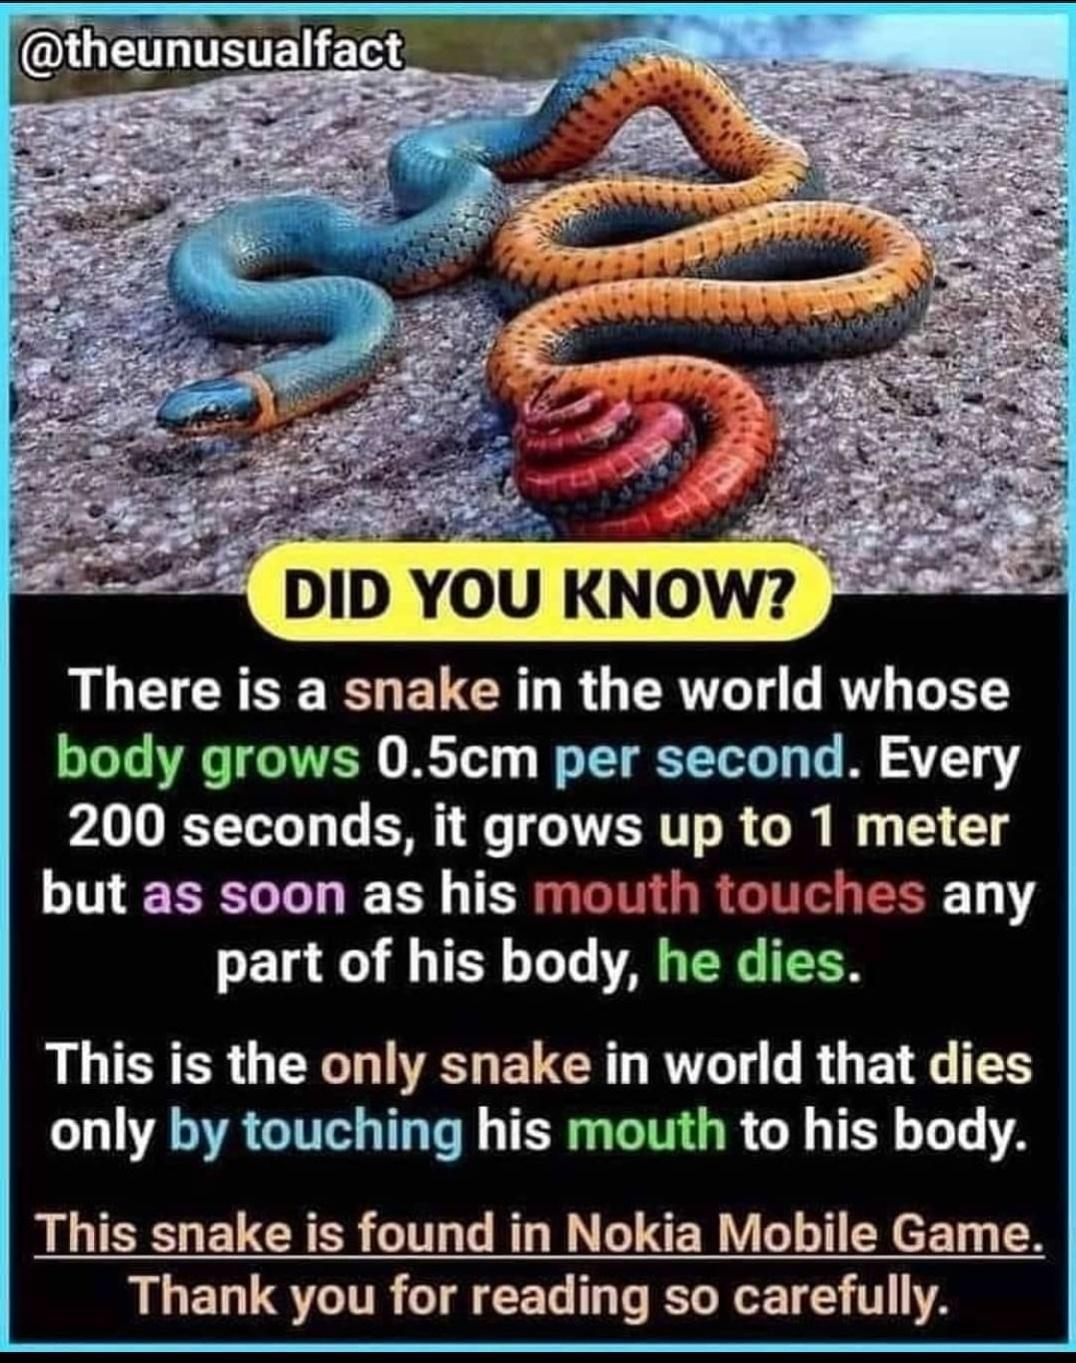 funny gaming memes - golden gate bridge - Did You Know? There is a snake in the world whose body grows 0.5cm per second. Every 200 seconds, it grows up to 1 meter but as soon as his mouth touches any part of his body, he dies. This is the only snake in wo